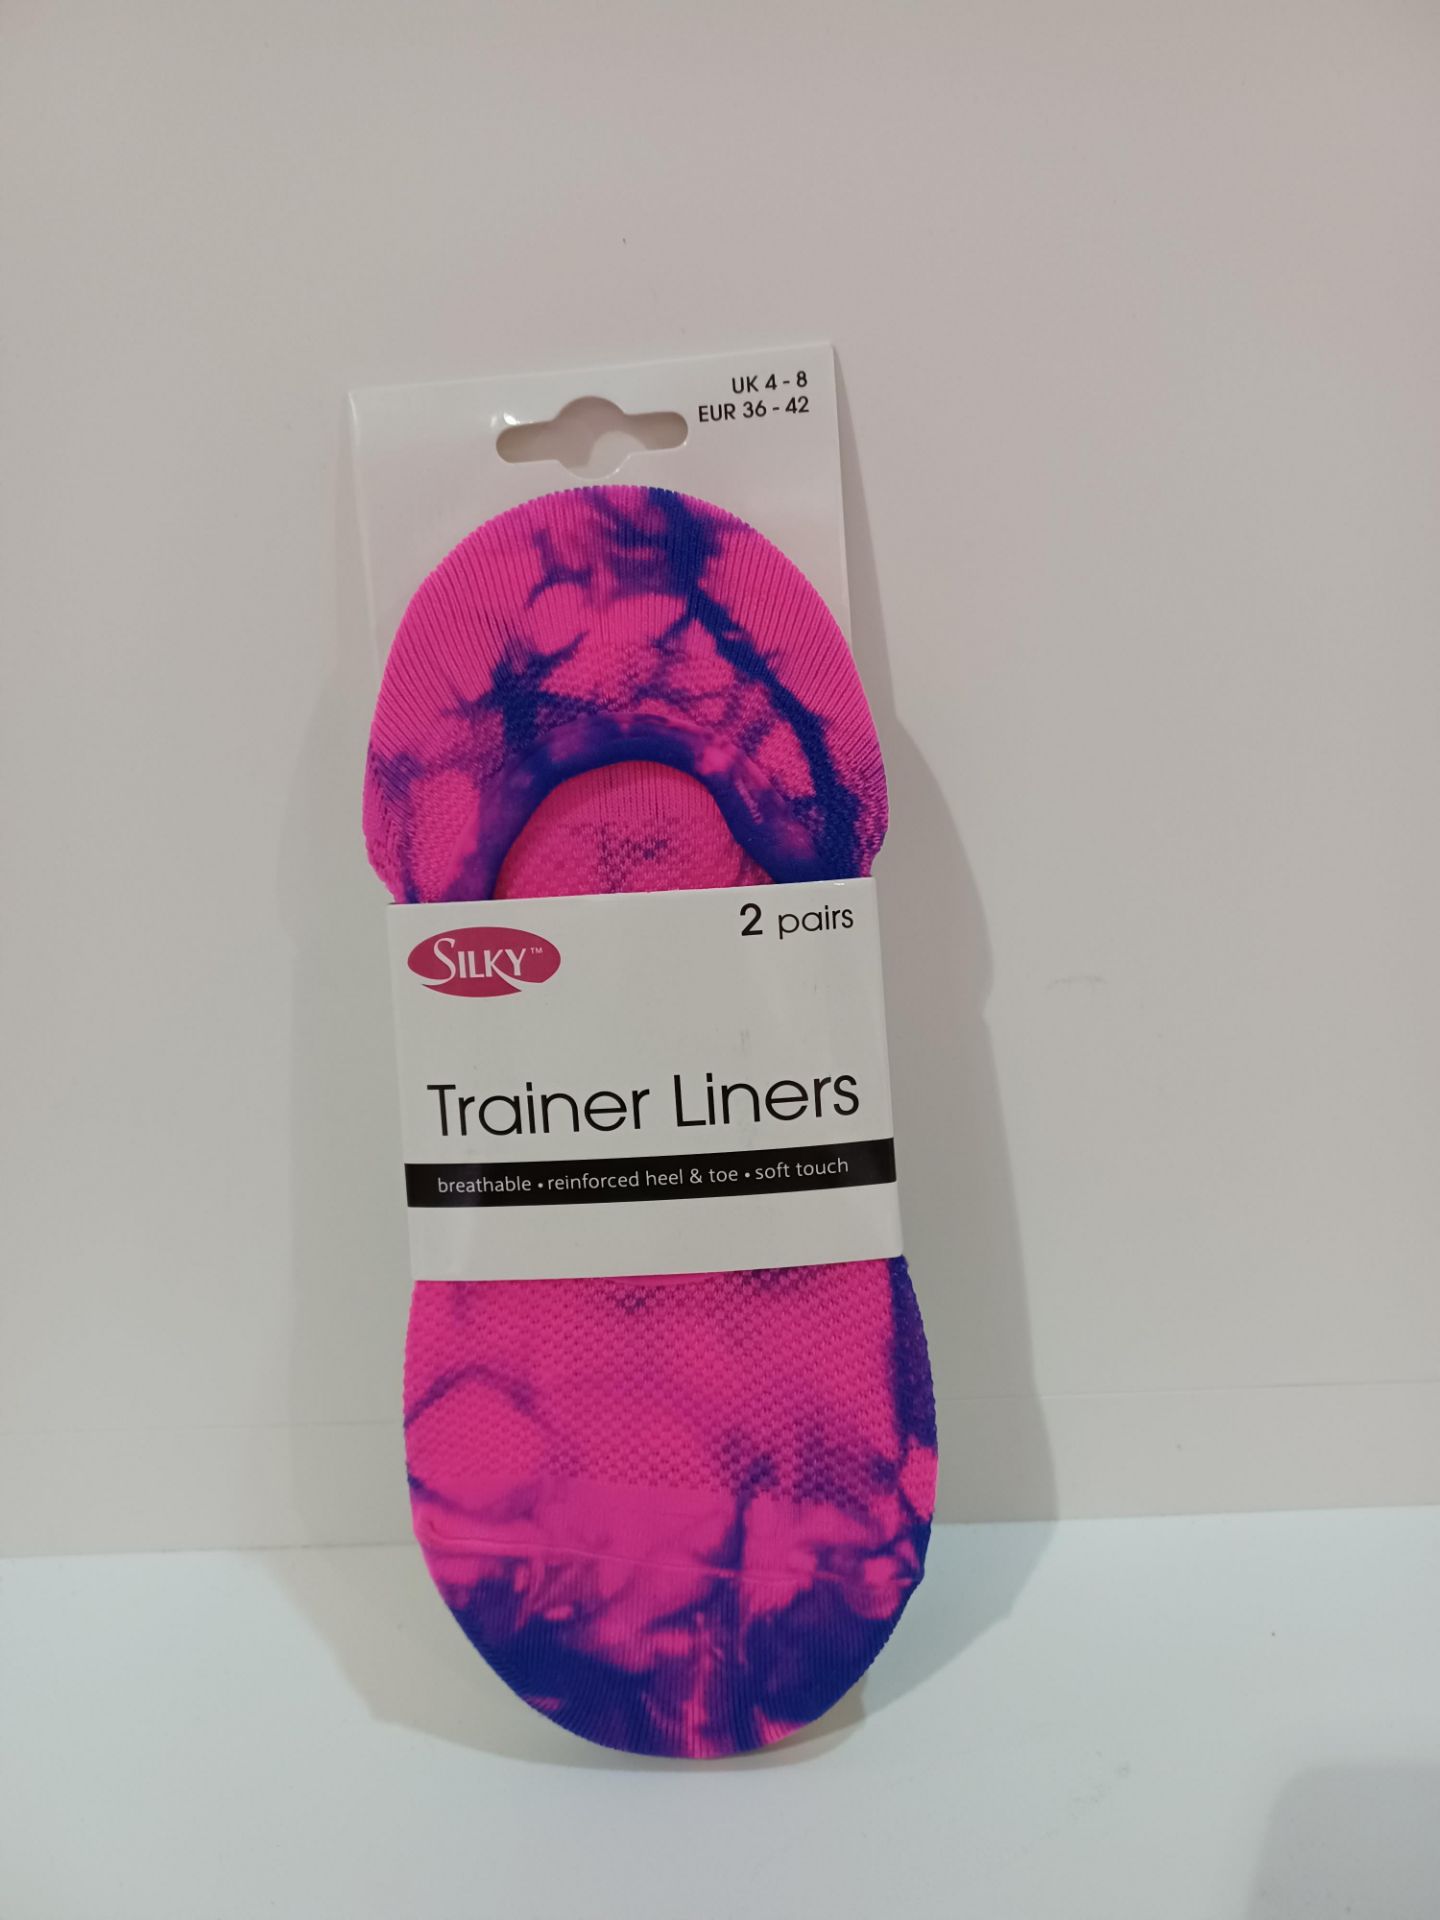 150 X NEW PACKAGED SILKY TRAINER LINERS. BREATHABLE. REINFORCED HEEL & TOE, SOFT TOUCH. ROW 15 B/W